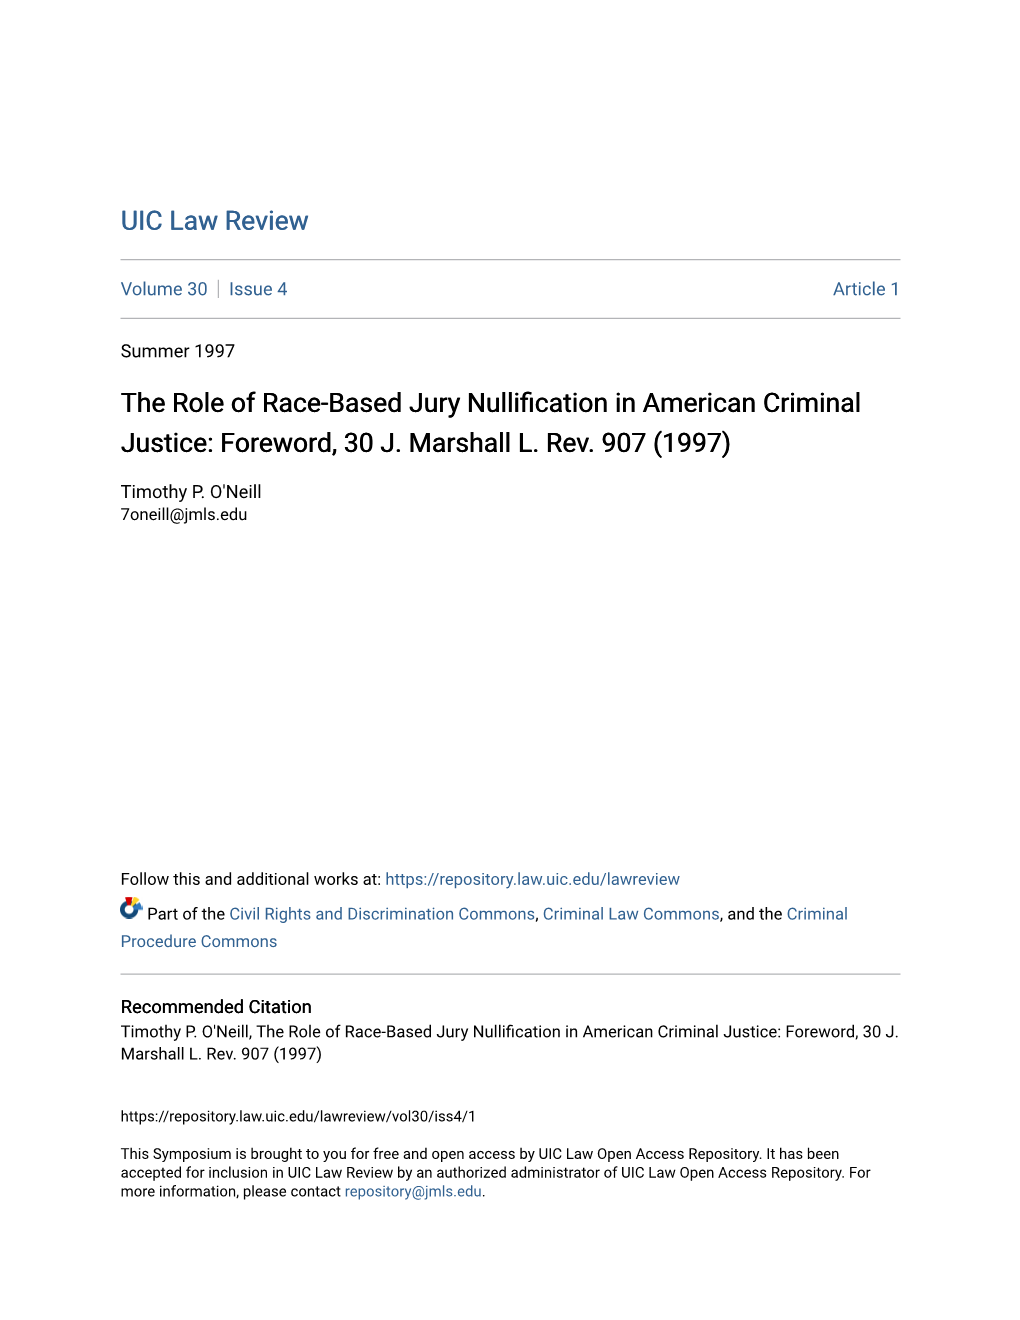 The Role of Race-Based Jury Nullification in American Criminal Justice: Foreword, 30 J